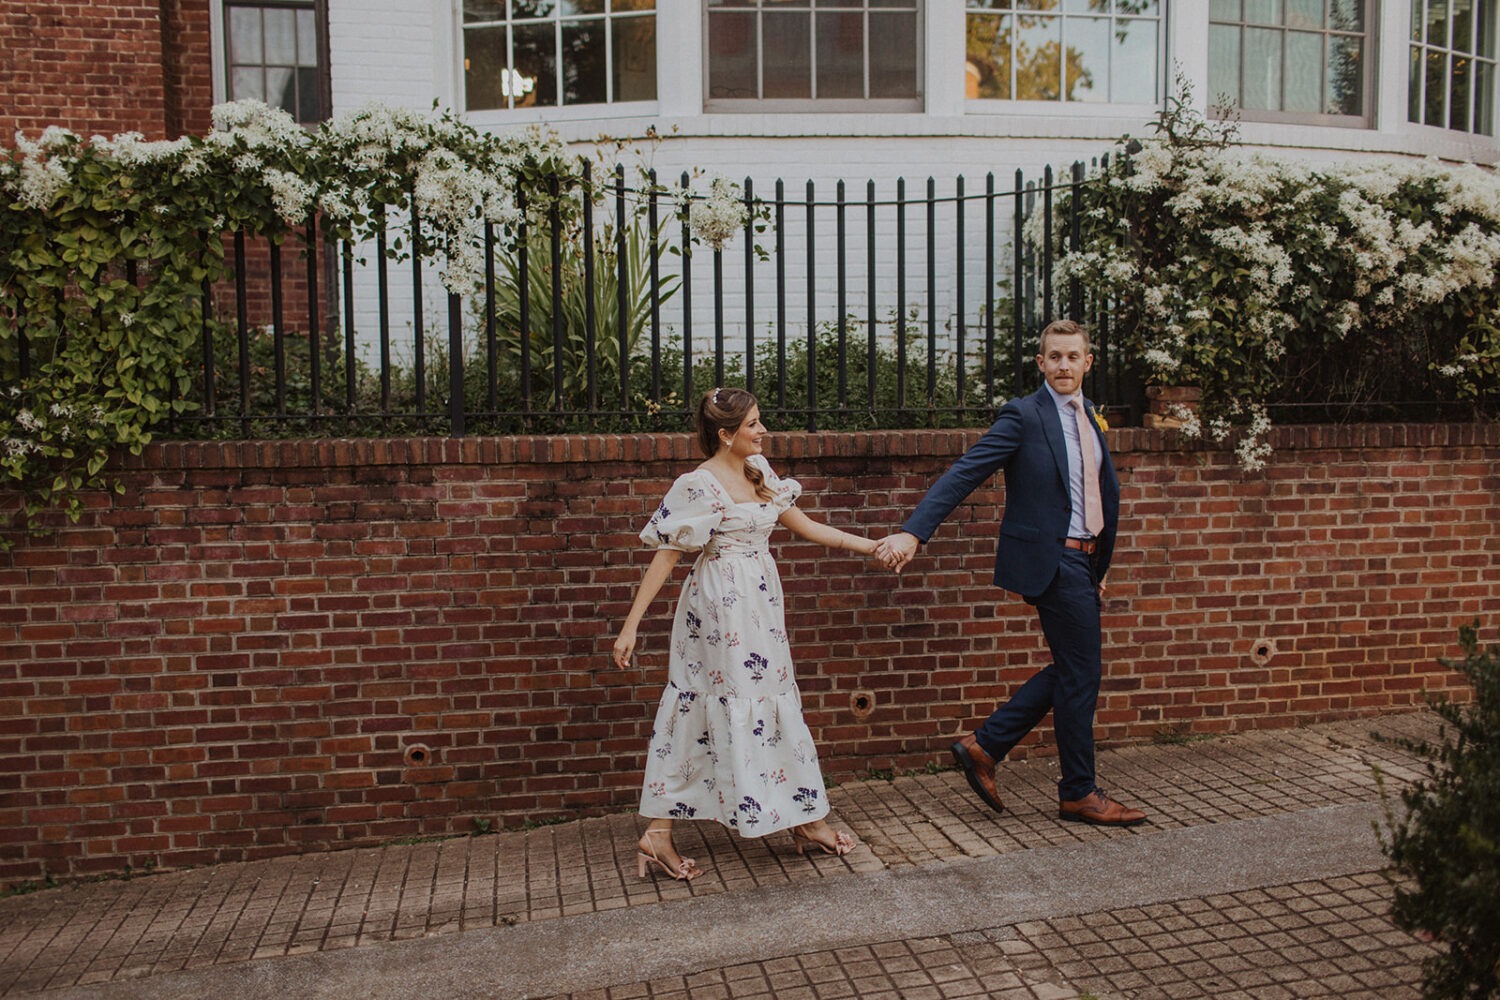 couple walks holding hands in front of brick and flowers at Dumbarton House garden wedding